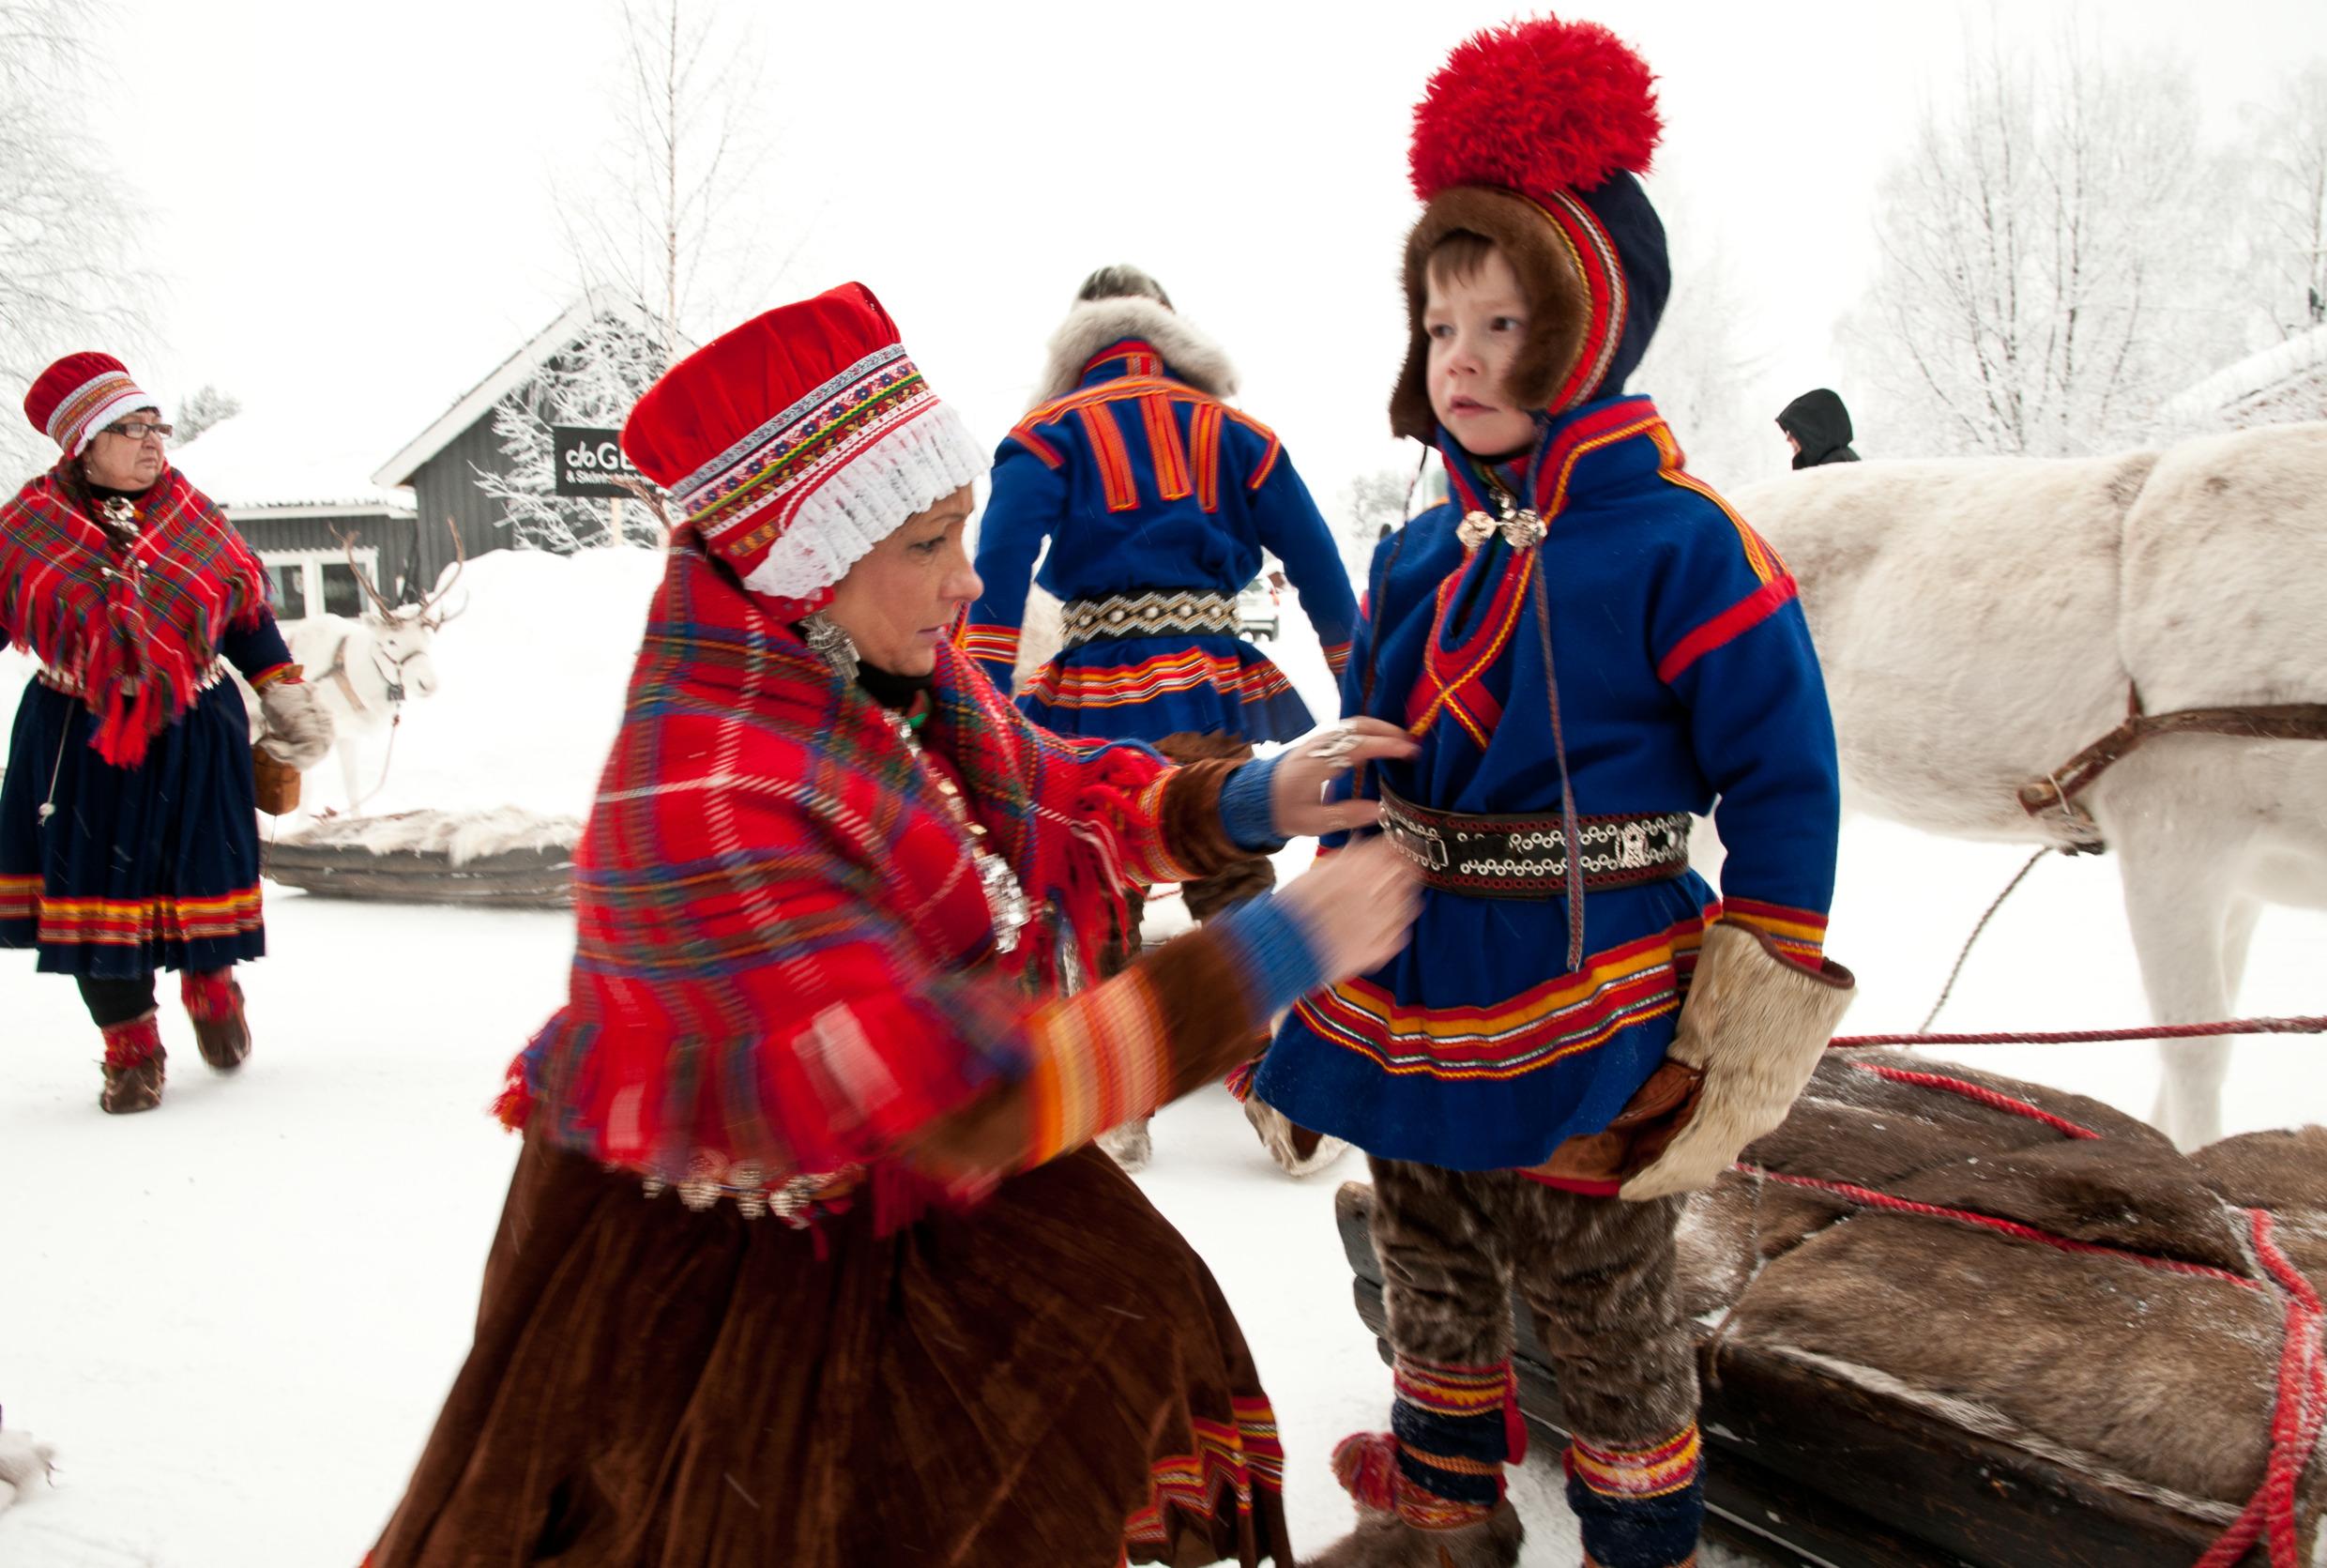 A woman helping a boy dress. They are both wearing traditional Sami clothing. In the background are two more people.